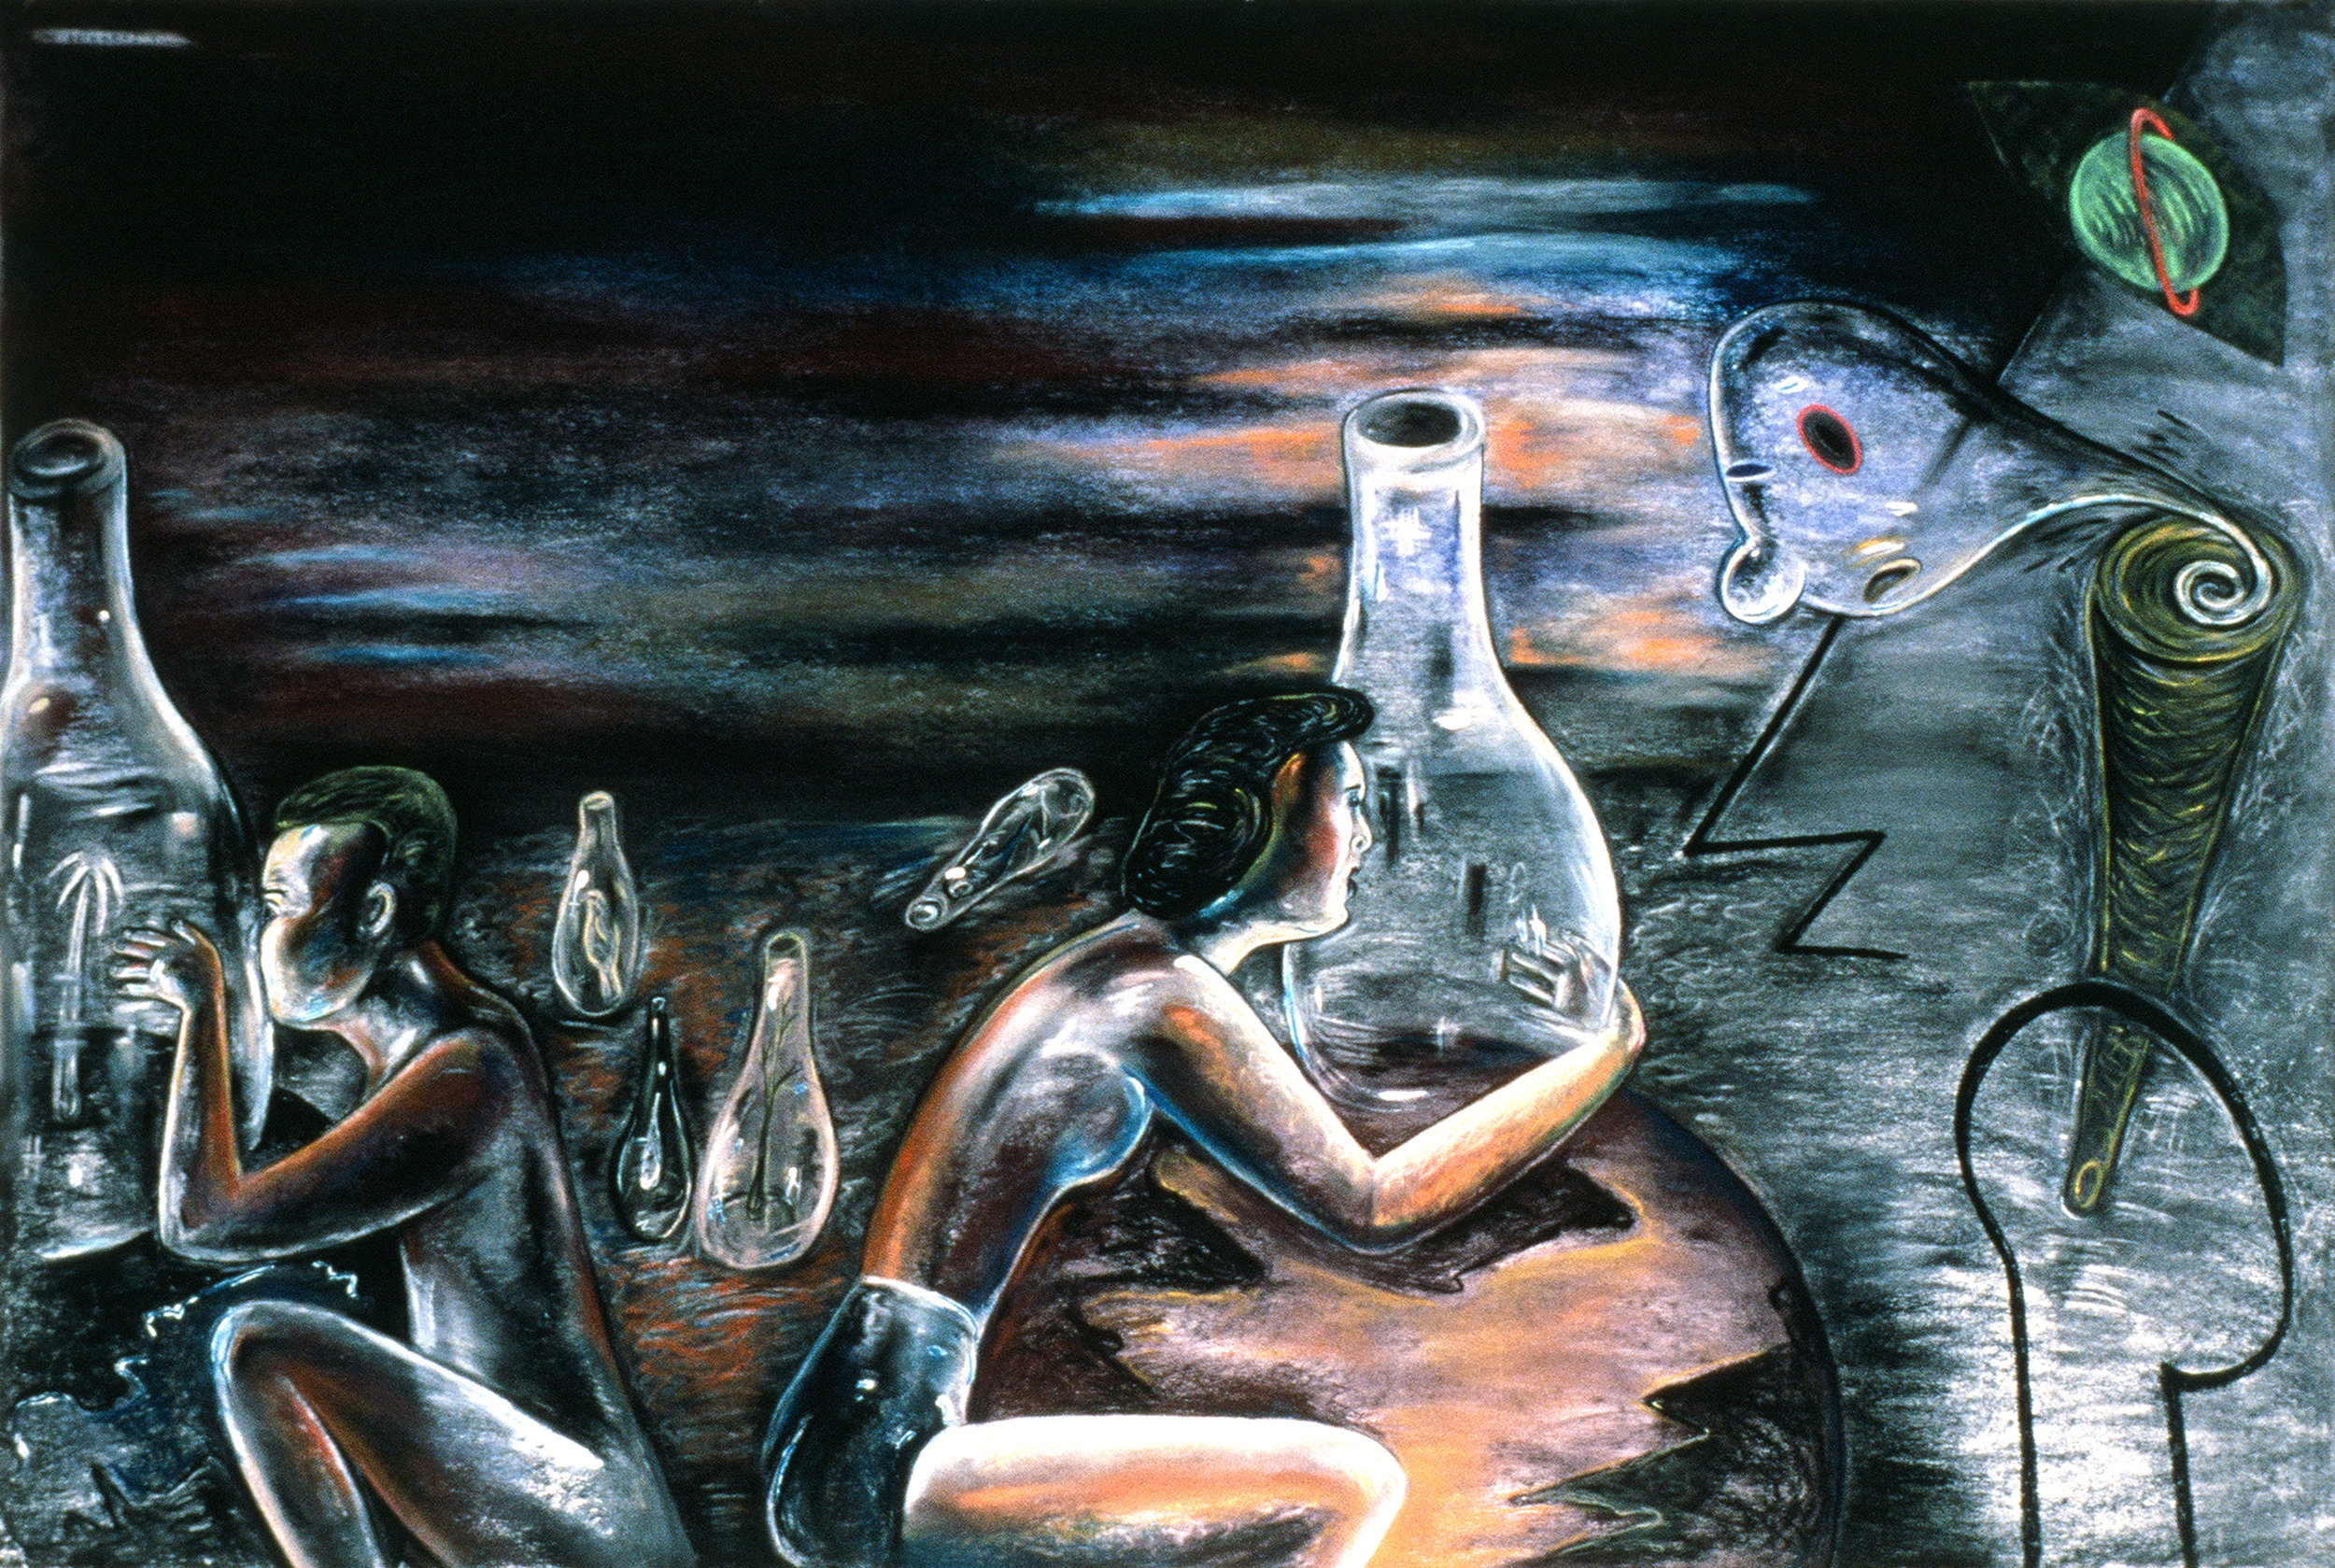 In Between Different Worlds, 48" × 60", pastel on paper, 1988